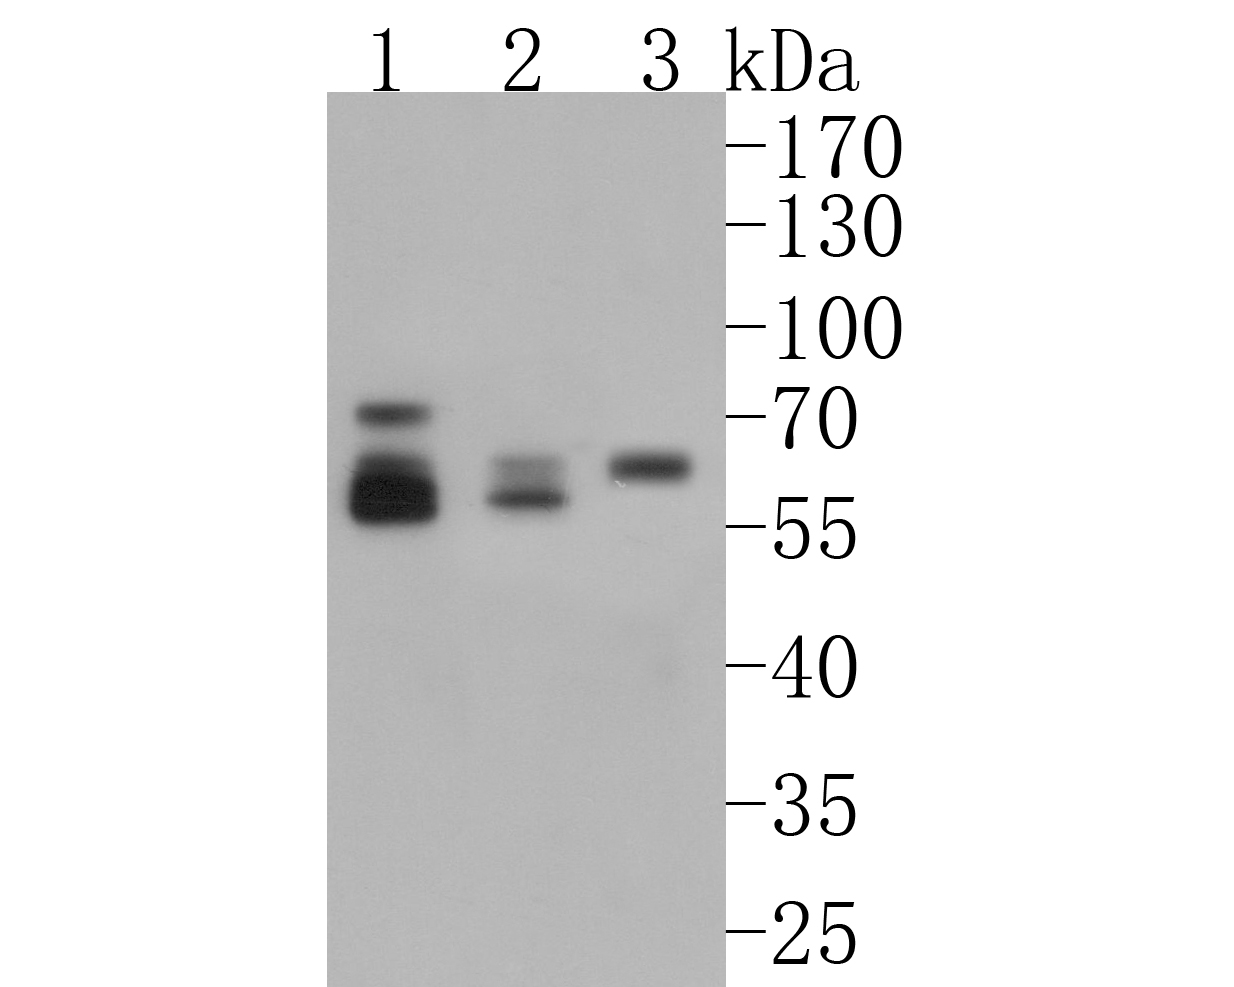 Western blot analysis of GBA on different lysates. Proteins were transferred to a PVDF membrane and blocked with 5% BSA in PBS for 1 hour at room temperature. The primary antibody (ET1703-32, 1/500) was used in 5% BSA at room temperature for 2 hours. Goat Anti-Rabbit IgG - HRP Secondary Antibody (HA1001) at 1:5,000 dilution was used for 1 hour at room temperature.<br />
Positive control: <br />
Lane 1: SK-Br-3 cell lysate<br />
Lane 2: A549 cell lysate<br />
Lane 3: MCF-7 cell lysate